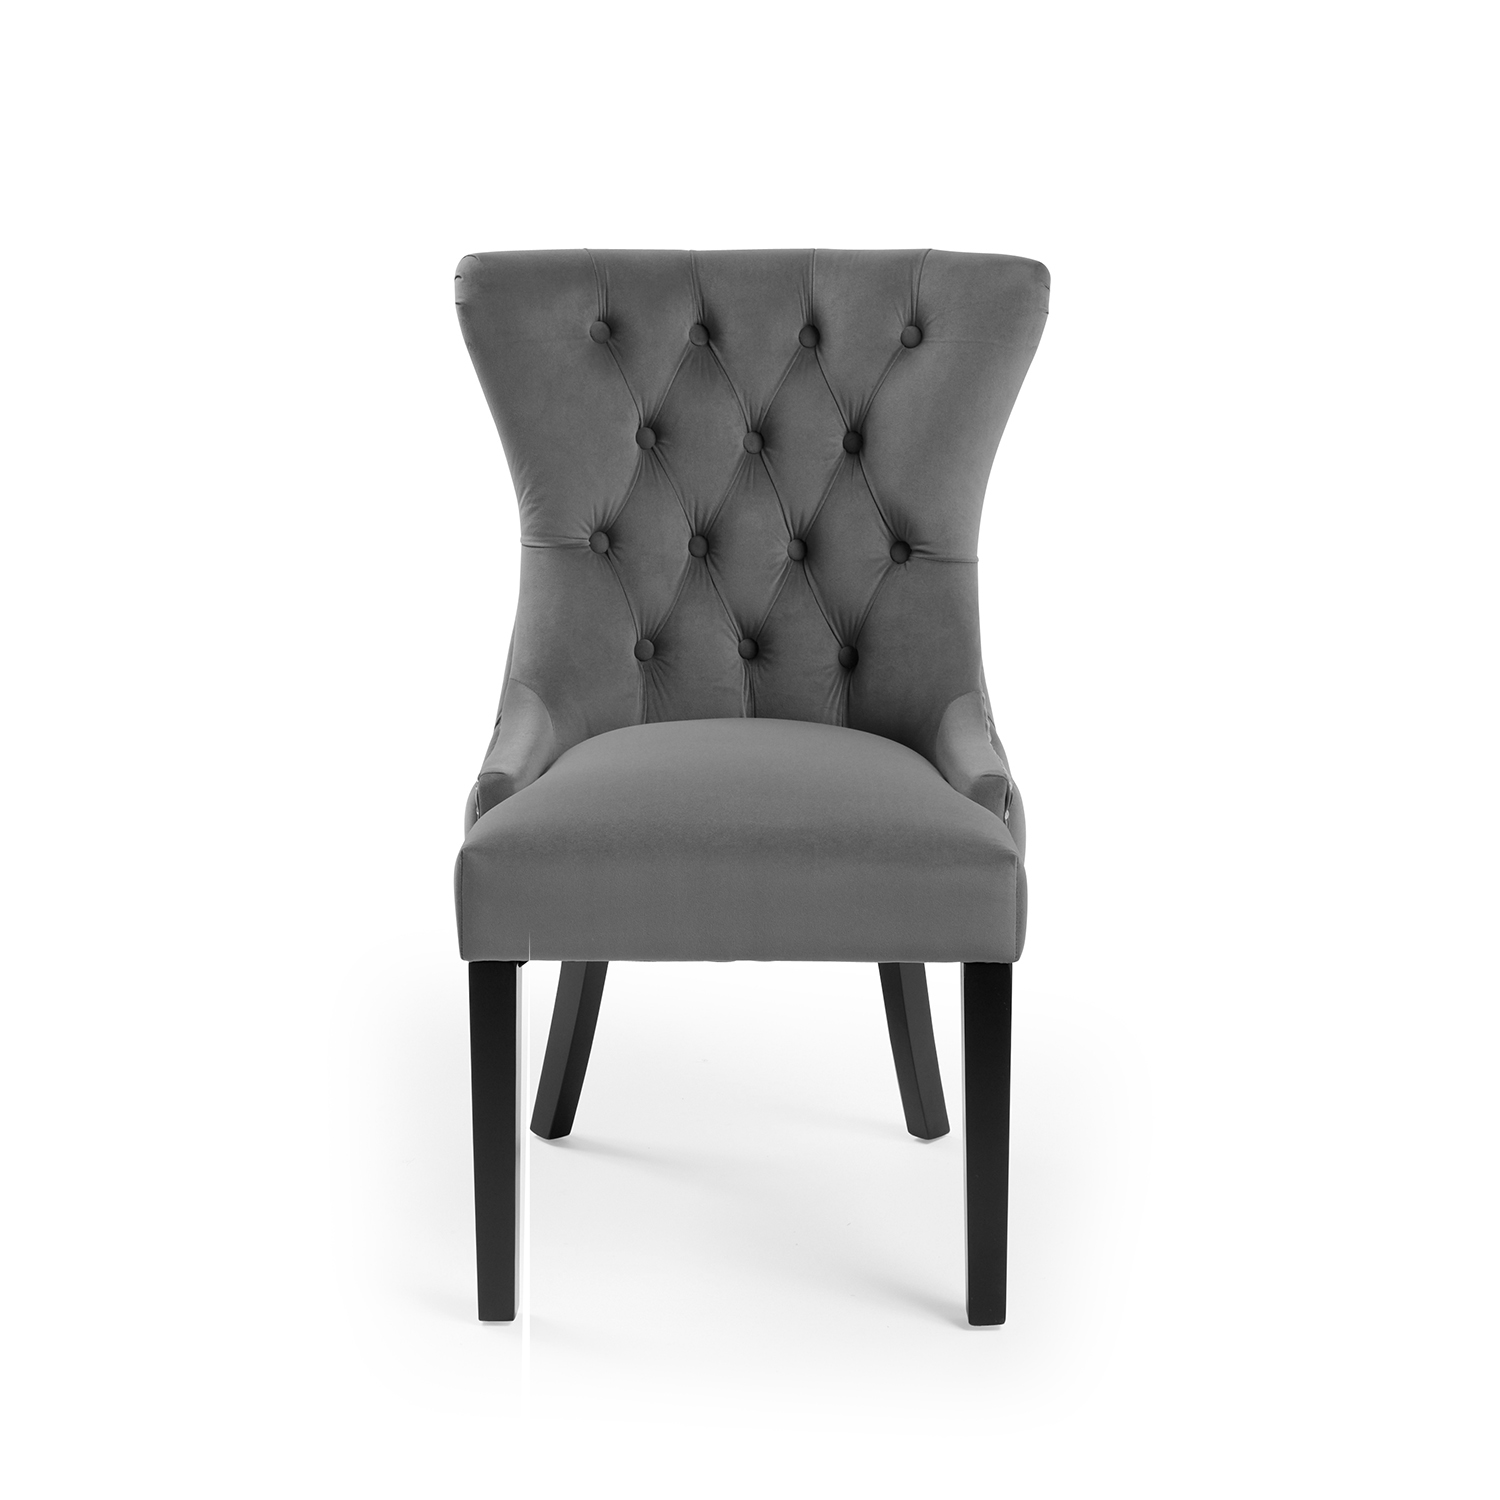 New Knightsbridge Grey Velvet Upholstered Chair With Button Tufted Detailing – Silver Studs